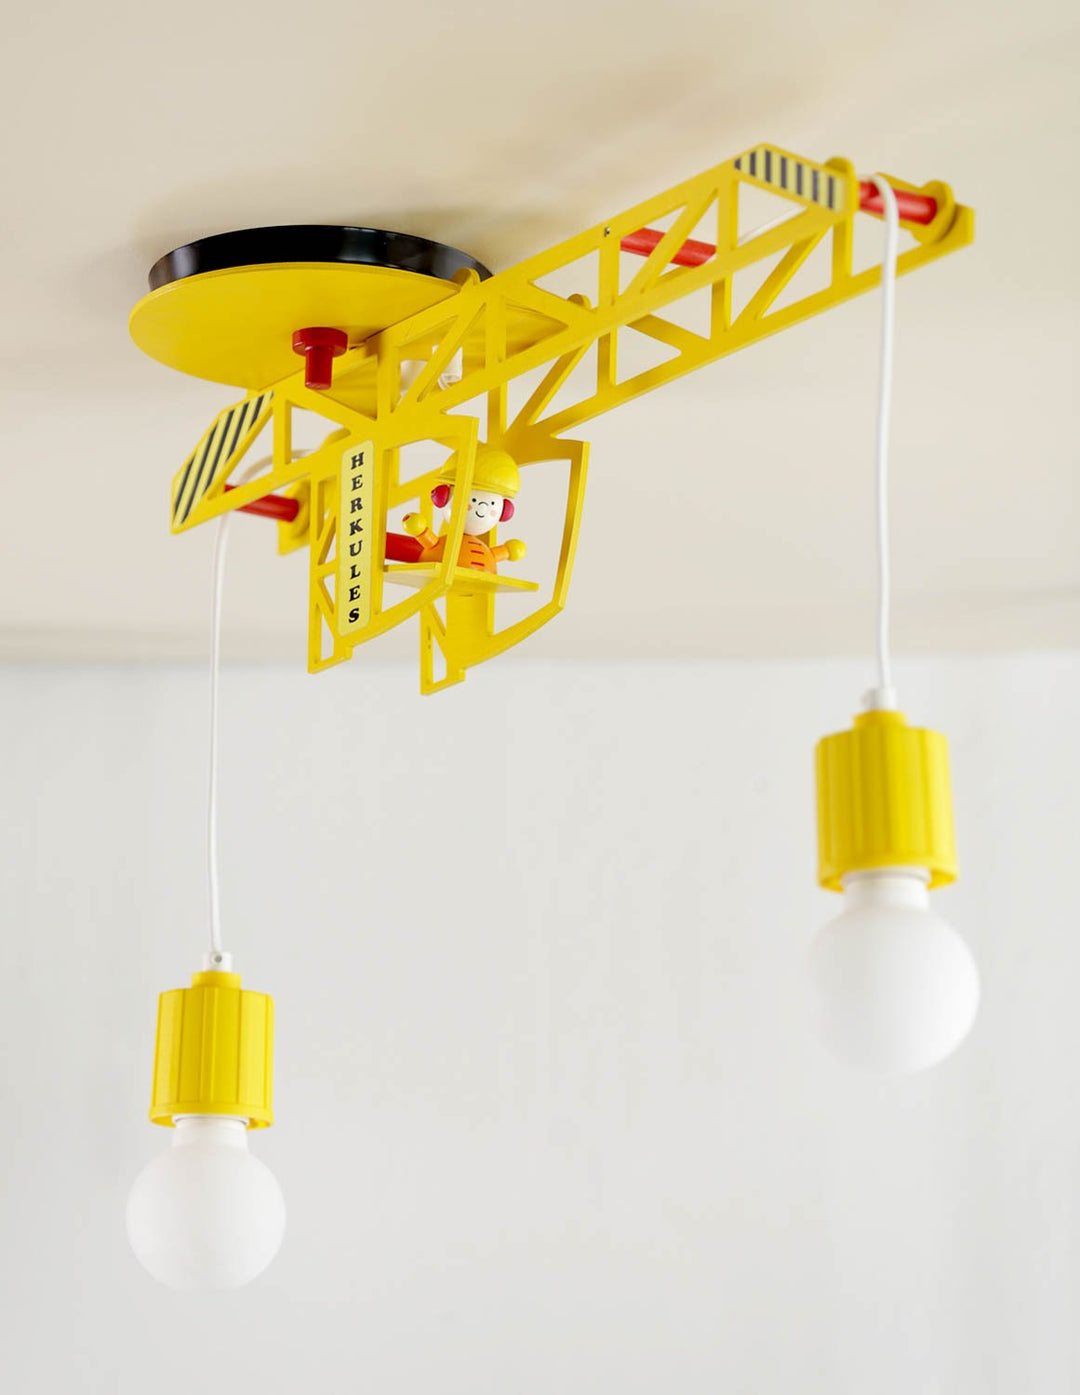 Ceiling light tower crane with"Markus"